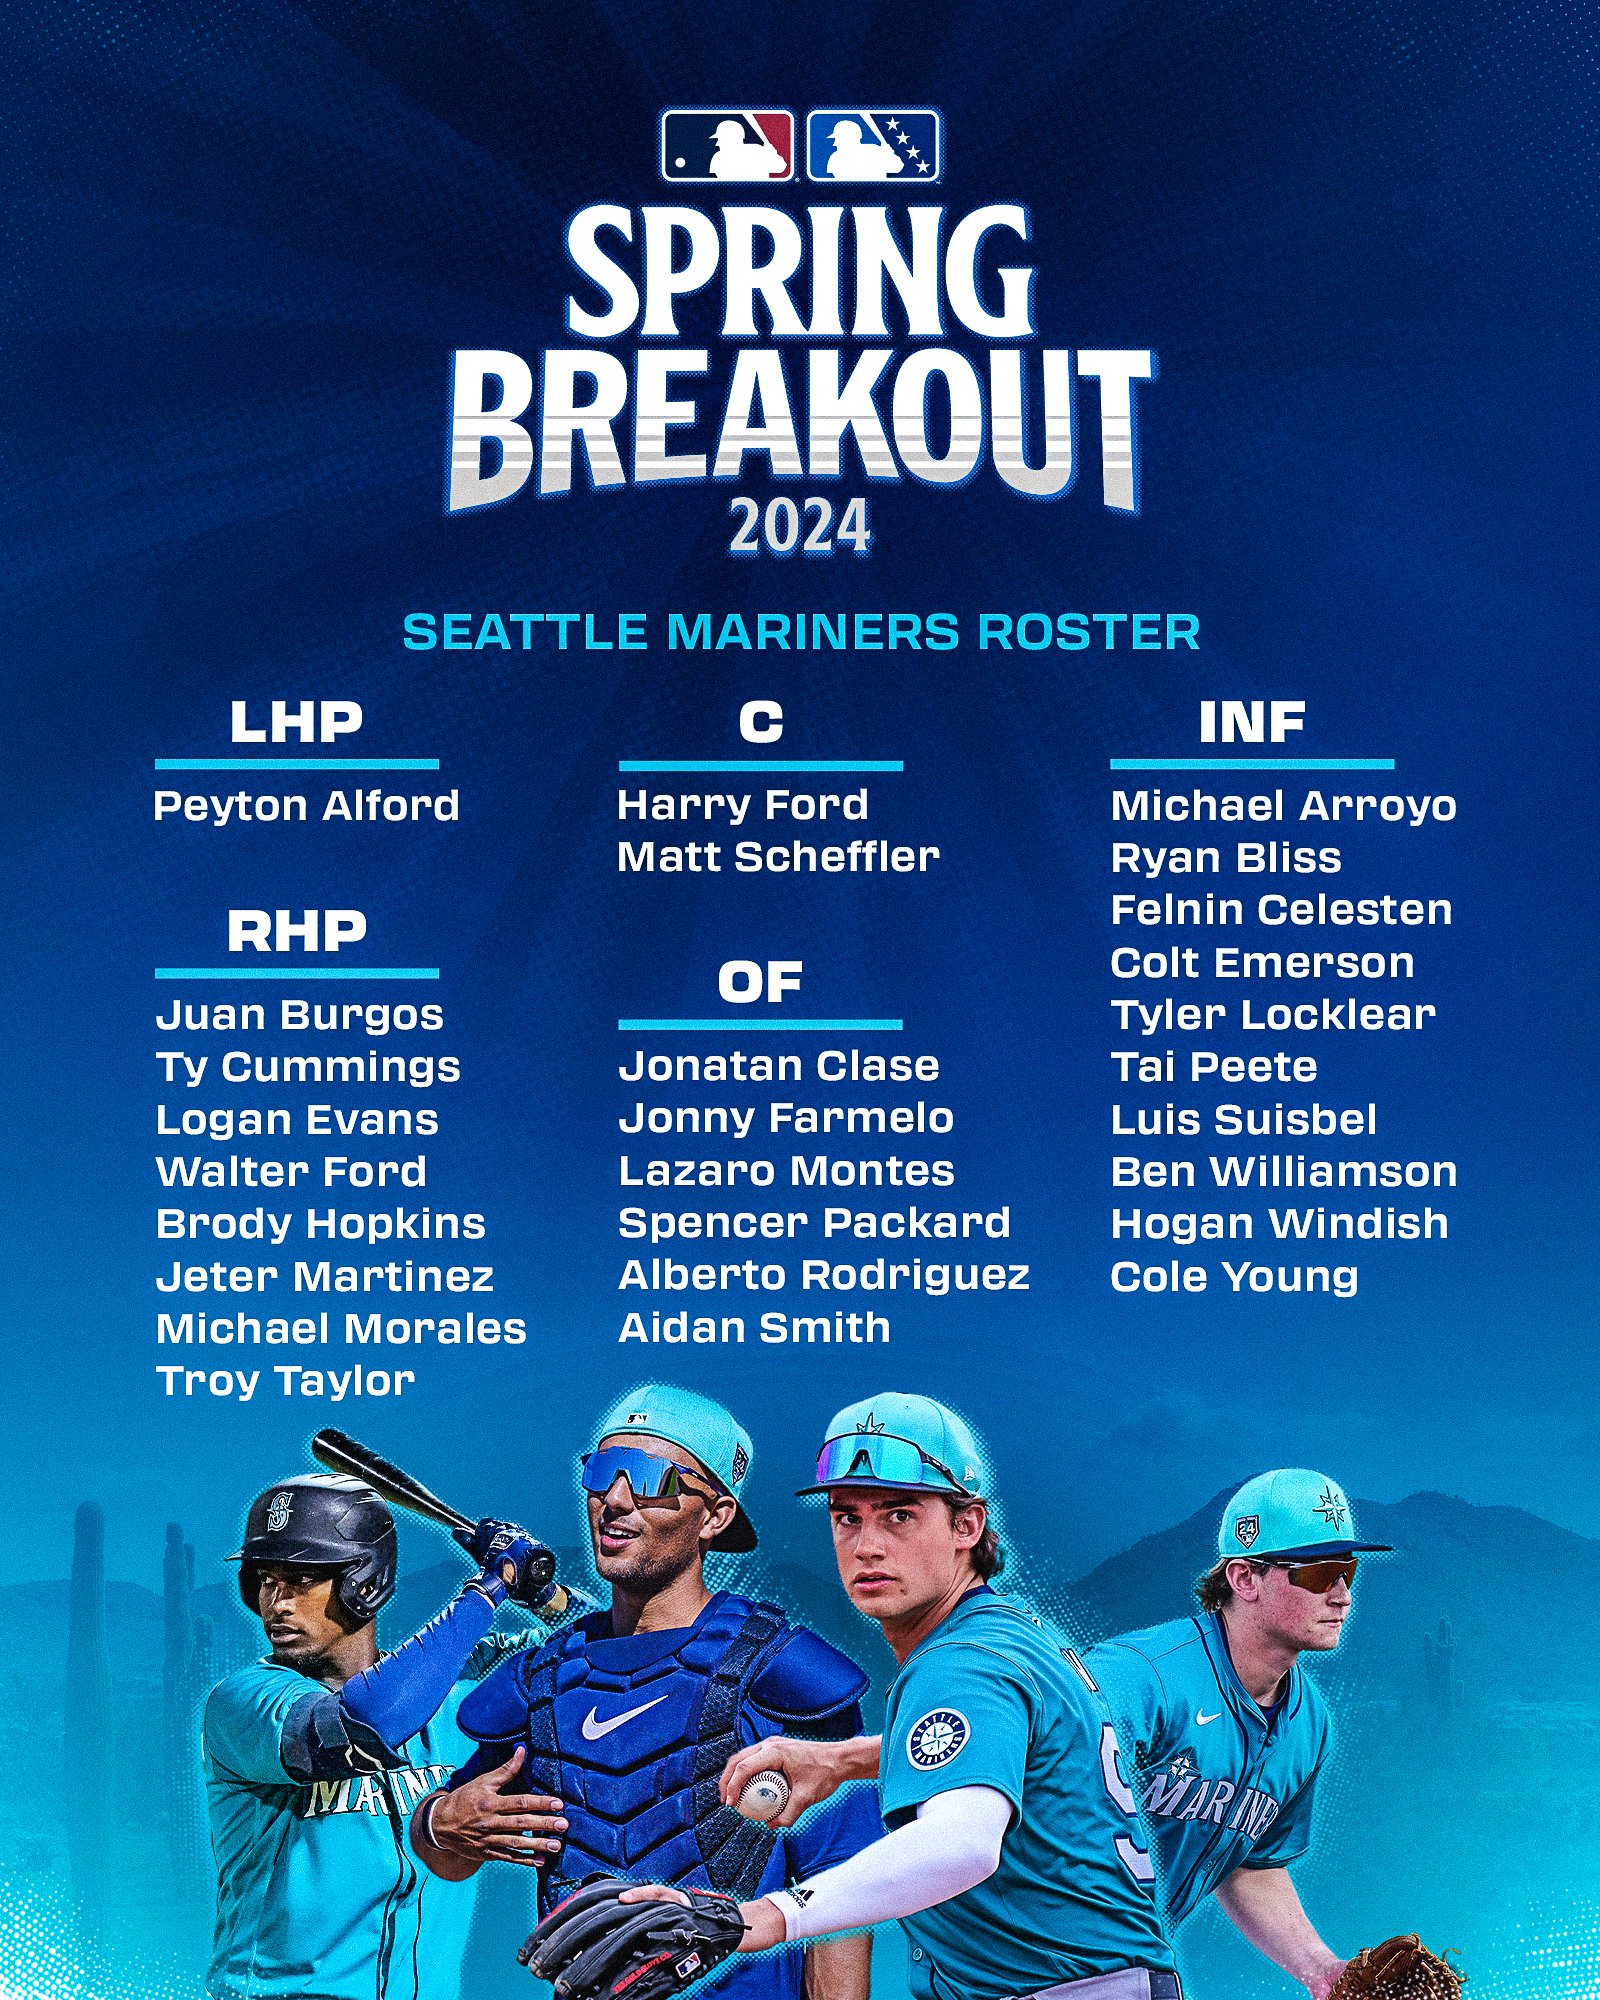 Mariners' Spring Breakout roster